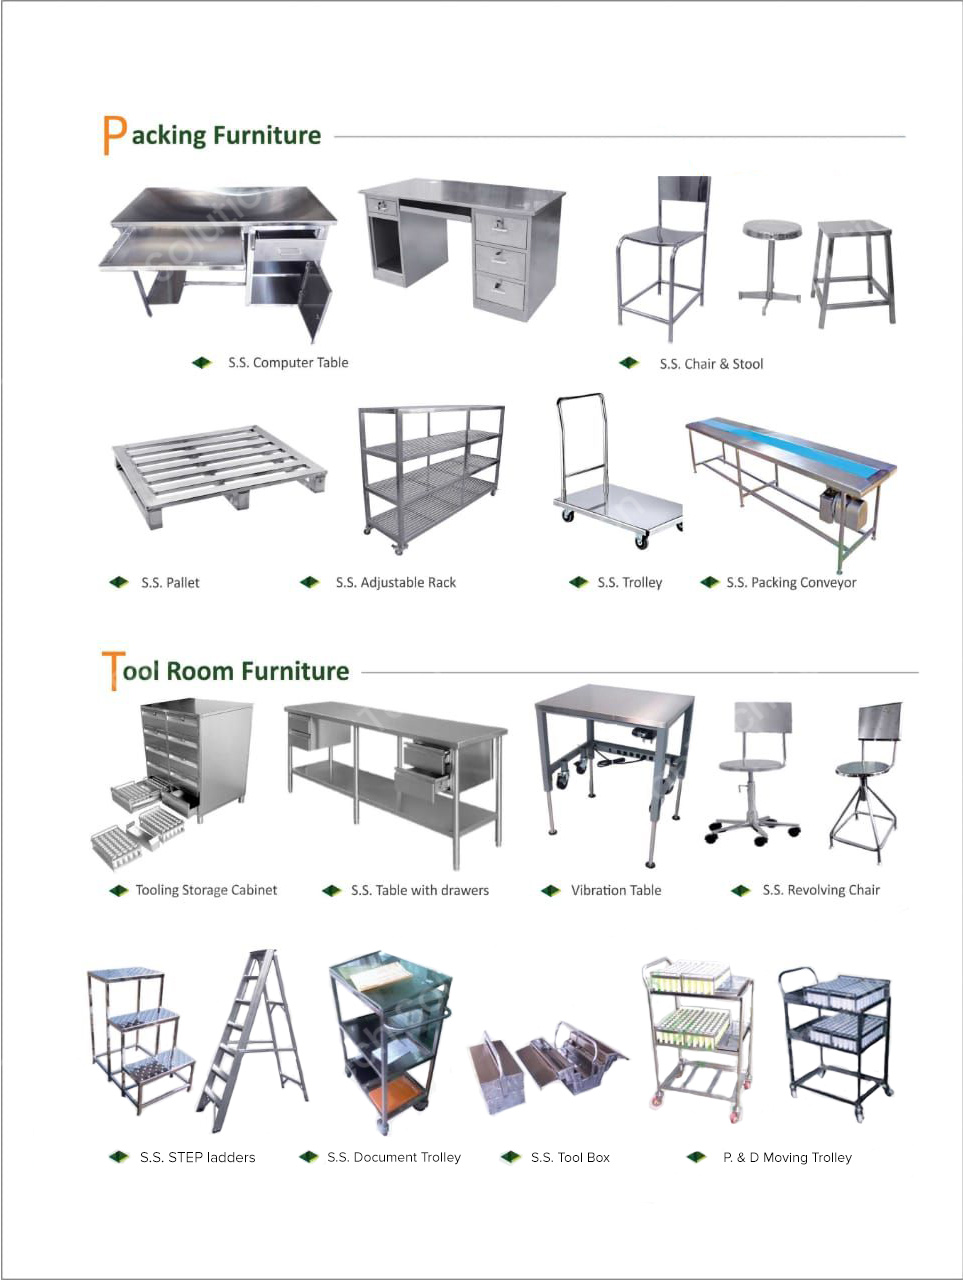 Clean Room Furniture, Tool Room & Packing CRF, Supplier and Manufacturer in Ahmedabad, Gujarat, India